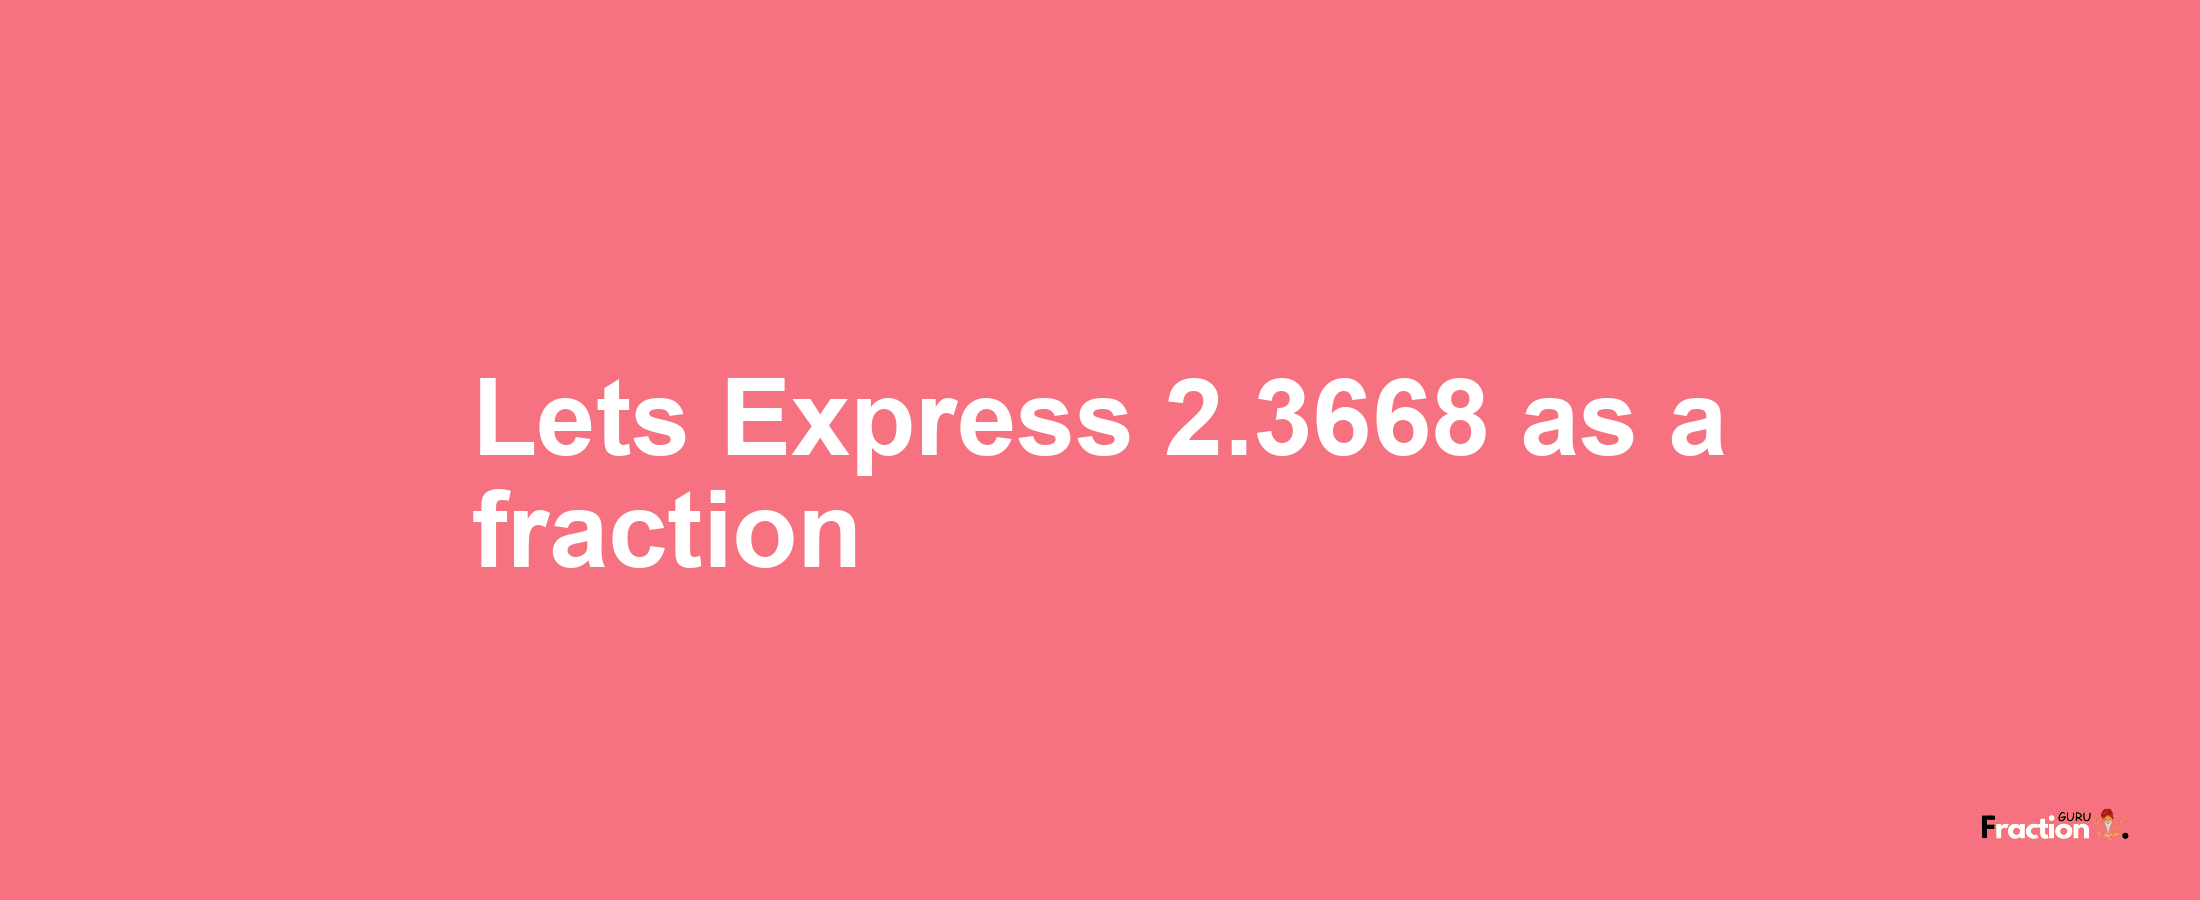 Lets Express 2.3668 as afraction